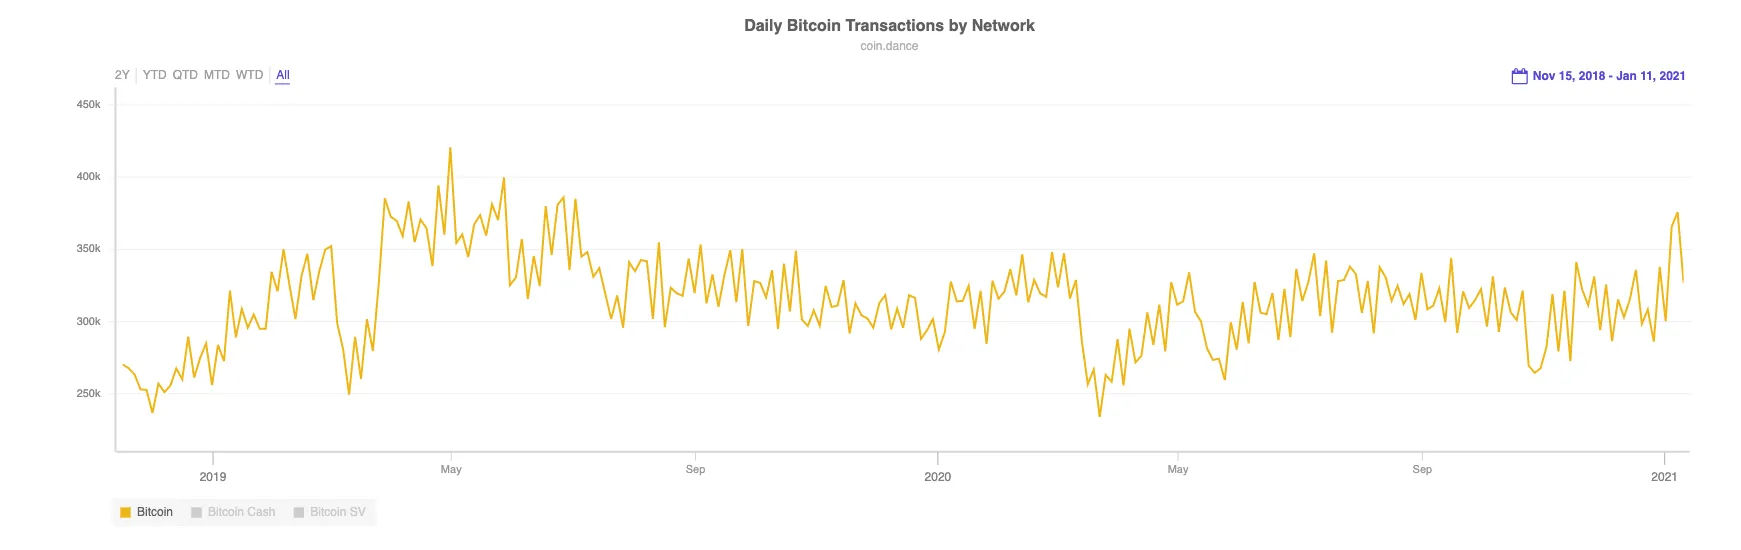 Bitcoin transactions per day (Image: Coin Dance)